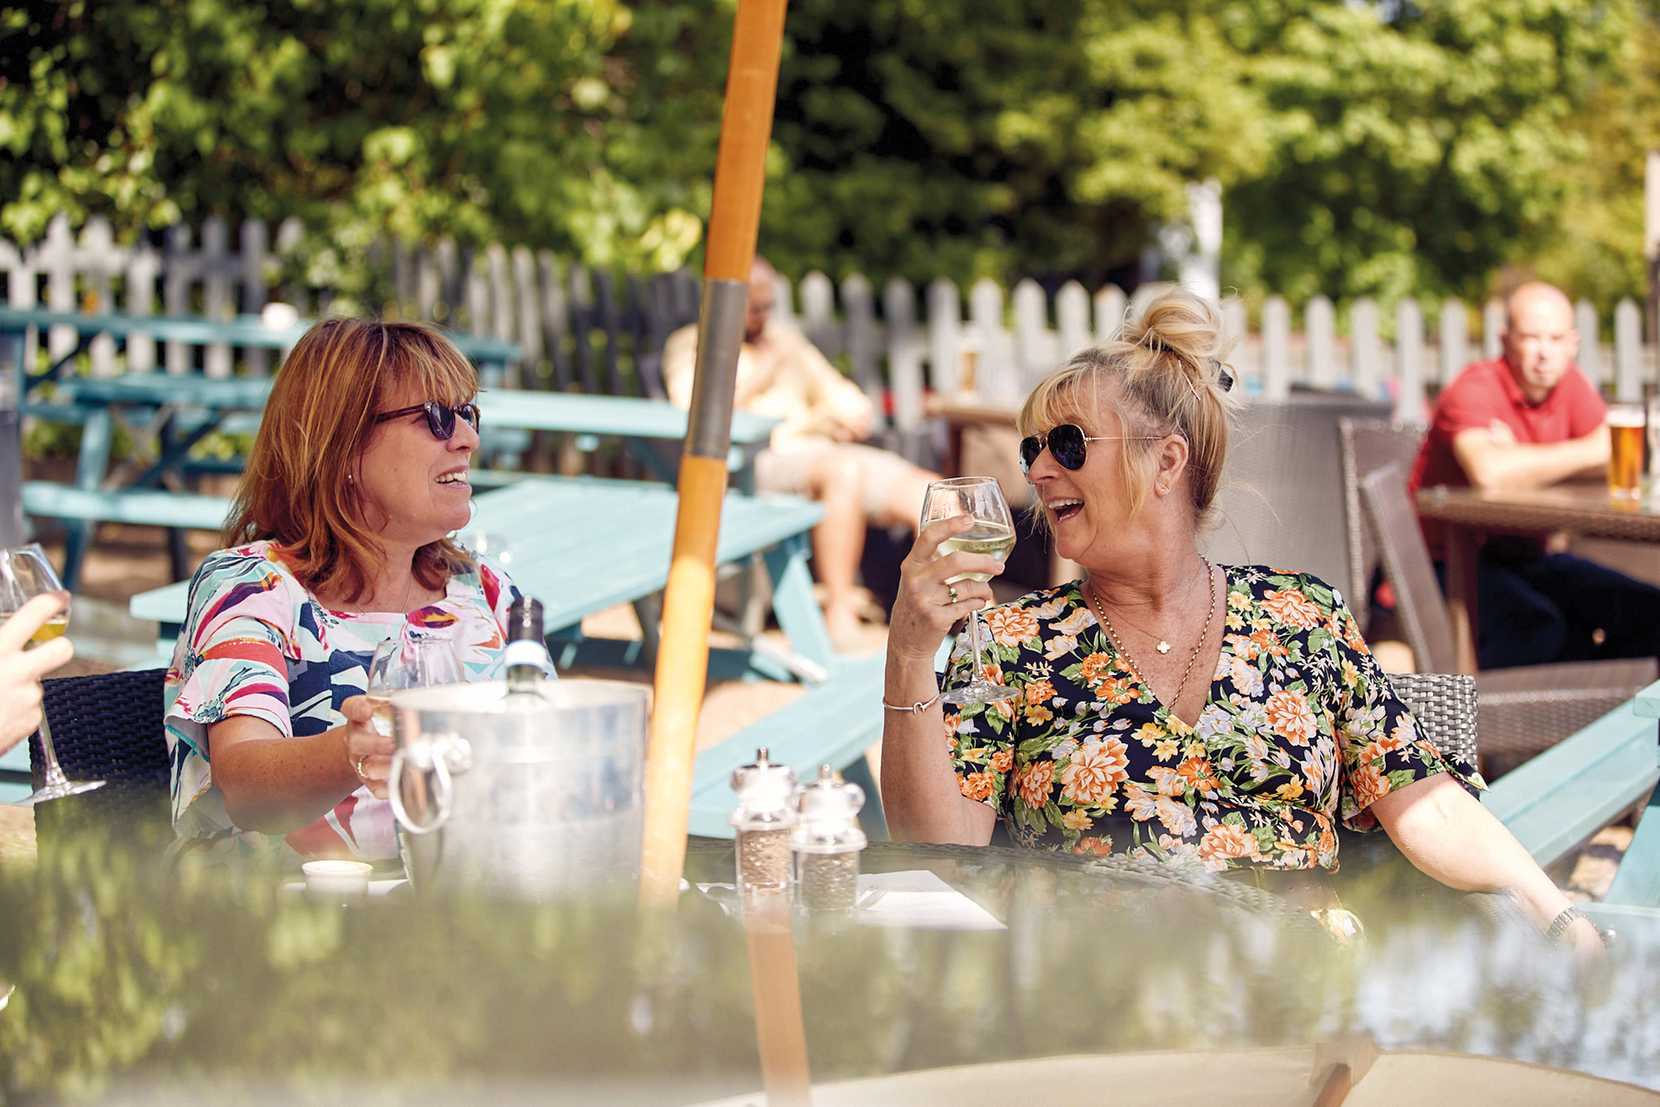 Two woman wearing sunglasses are drinking in the sun. In the background, a man drinks a beer.